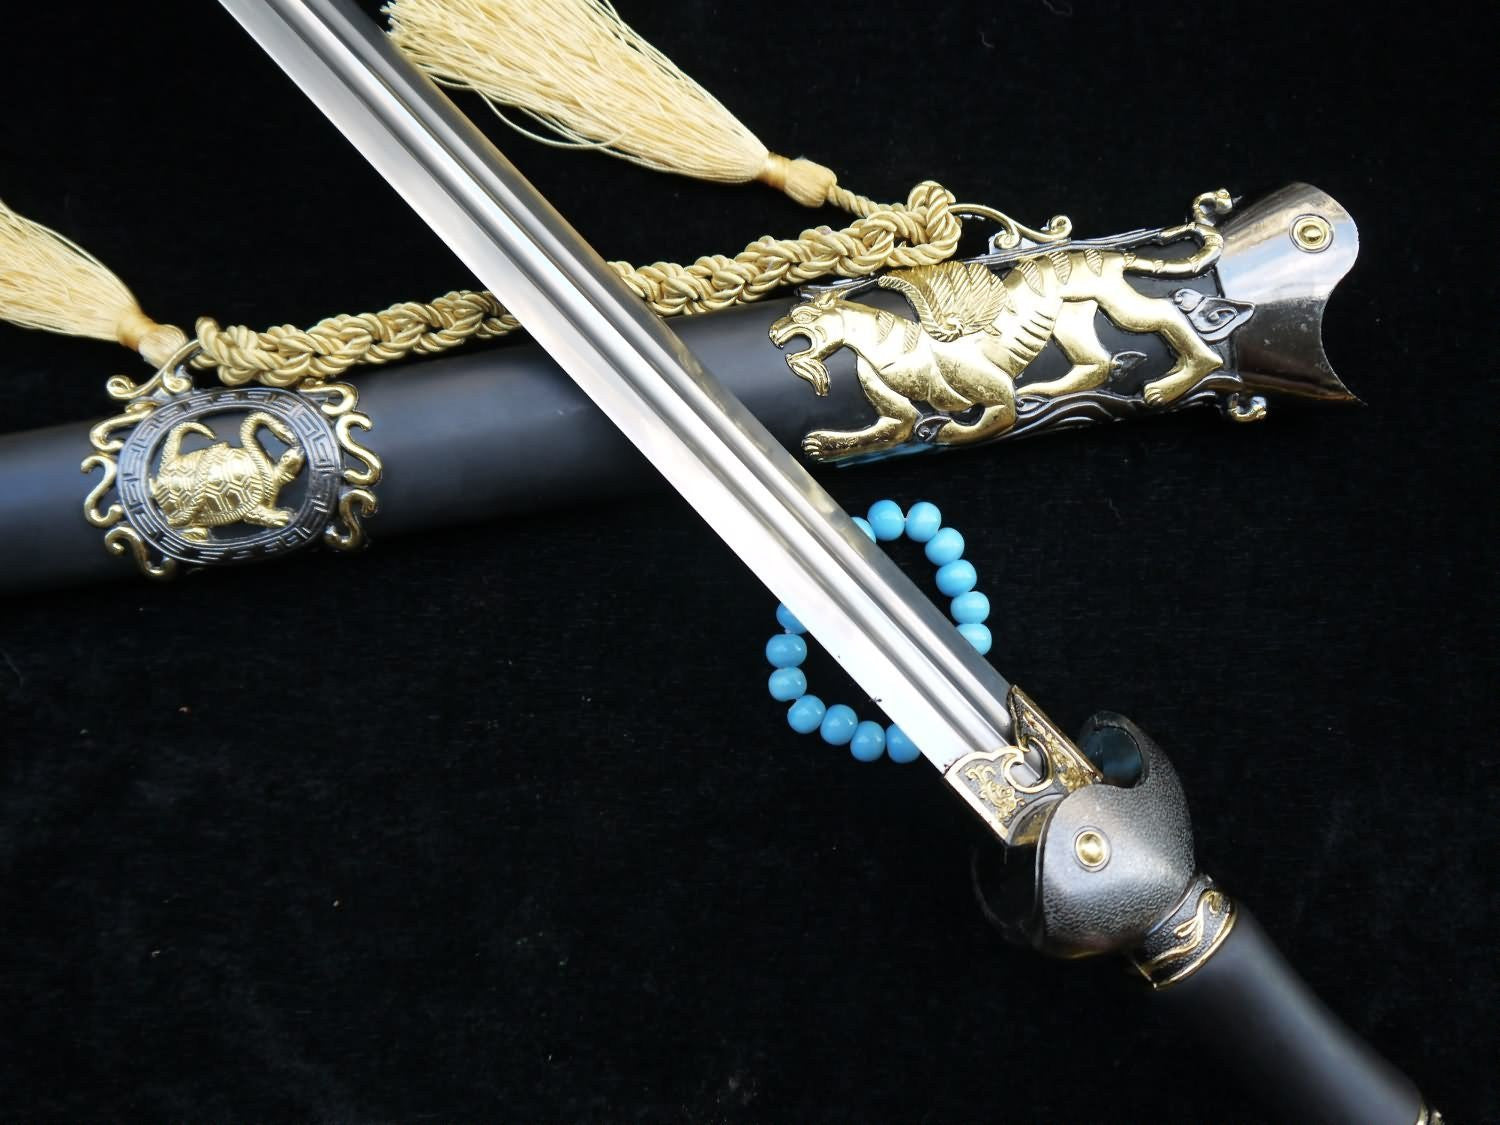 Longquan sword/Chinese sword/Damascus steel blade/Handmade/Two-color alloy fittings/Length 39" - Chinese sword shop